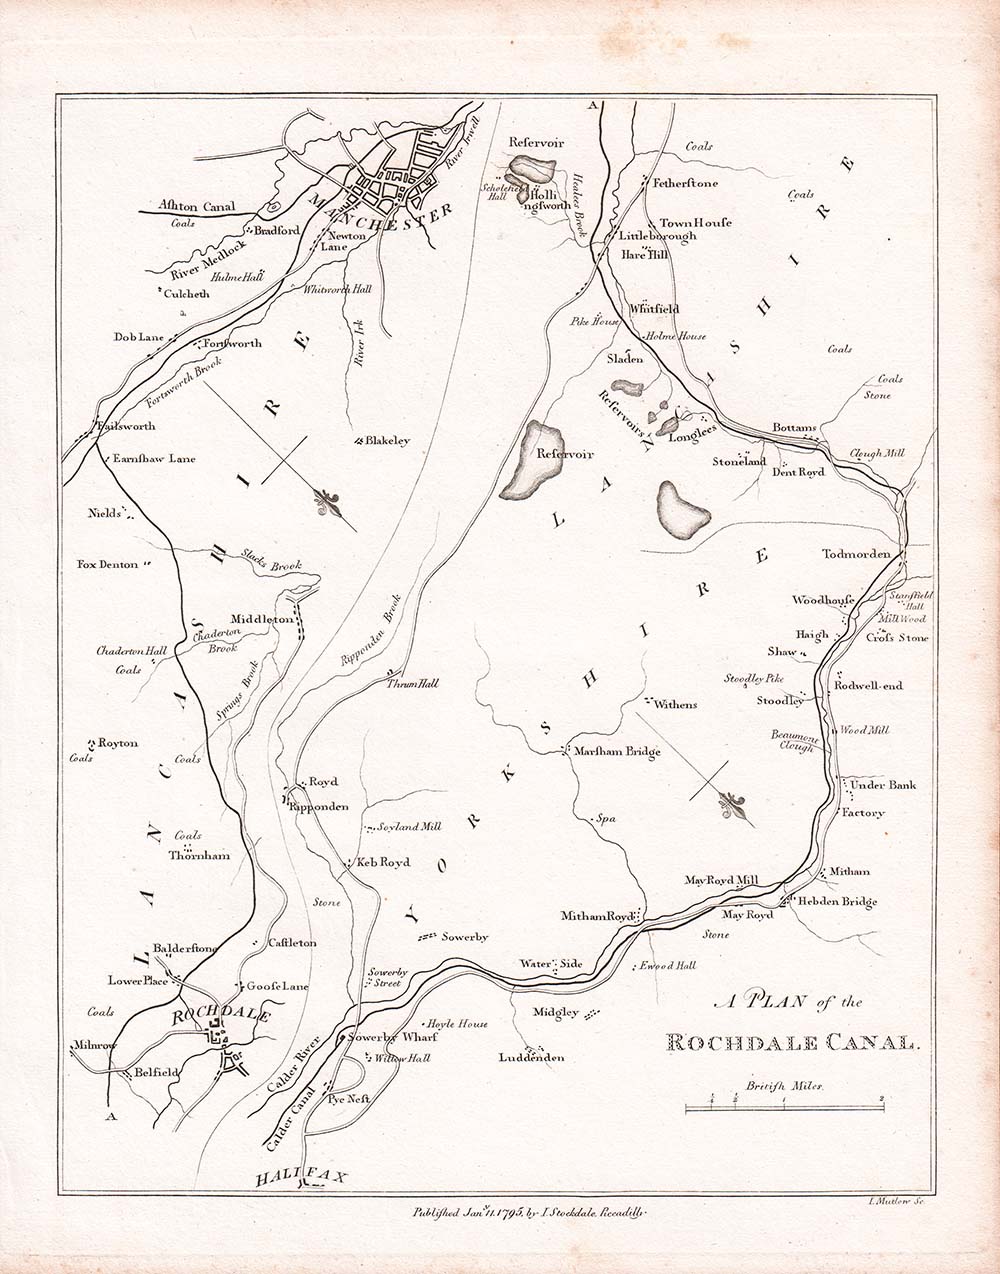 Plan of the Rochdale Canal